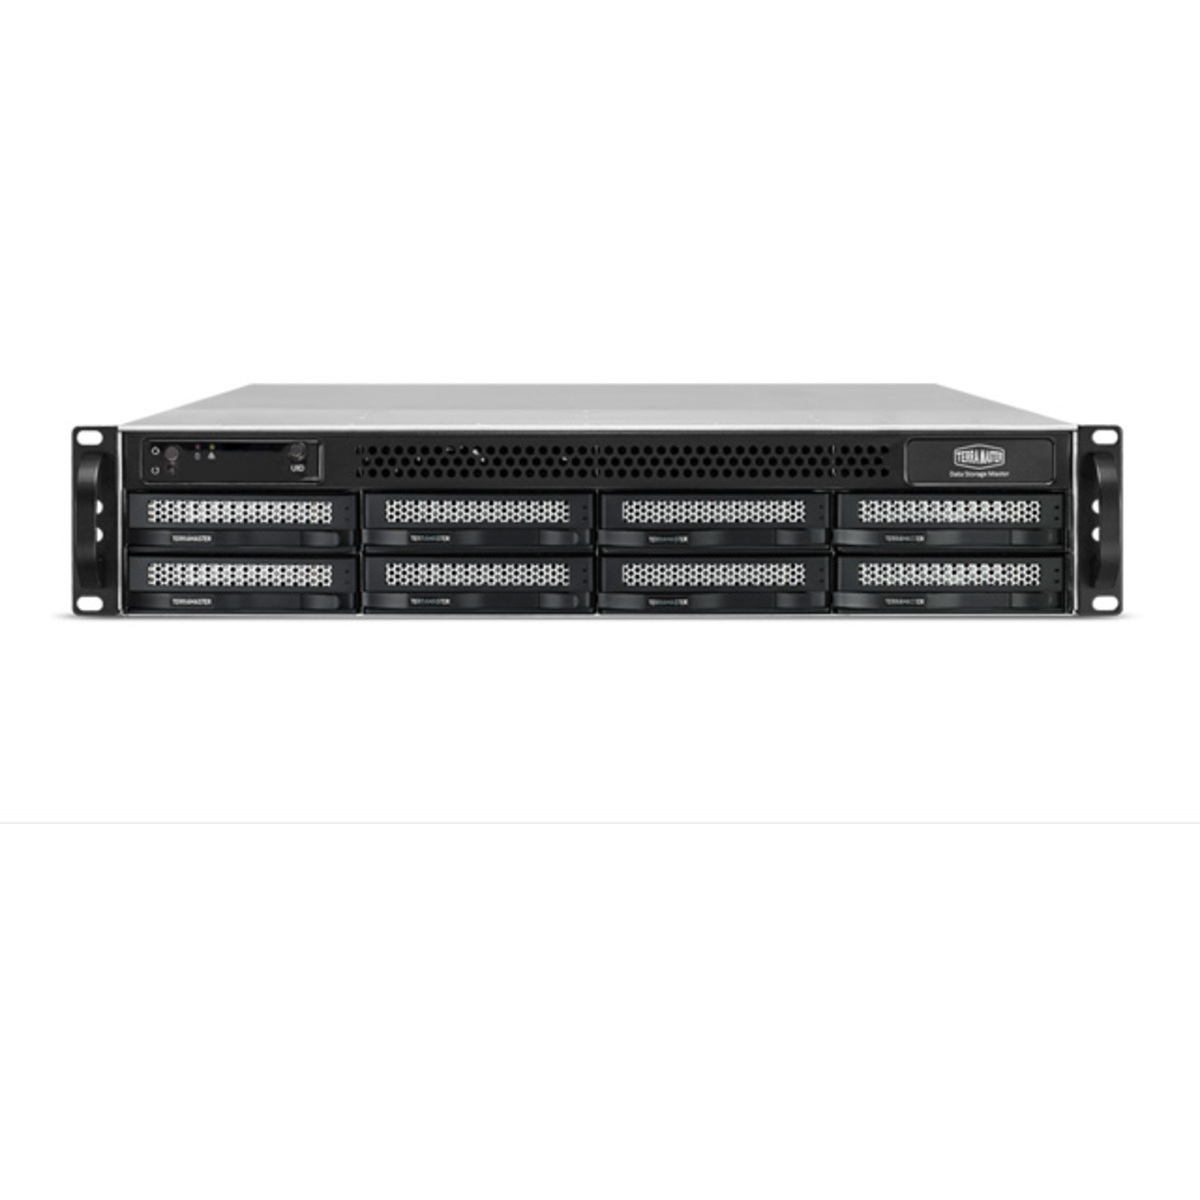 TerraMaster U8-423 16tb 8-Bay RackMount Multimedia / Power User / Business NAS - Network Attached Storage Device 4x4tb Western Digital Red SA500 WDS400T1R0A 2.5 560/530MB/s SATA 6Gb/s SSD NAS Class Drives Installed - Burn-In Tested - FREE RAM UPGRADE U8-423